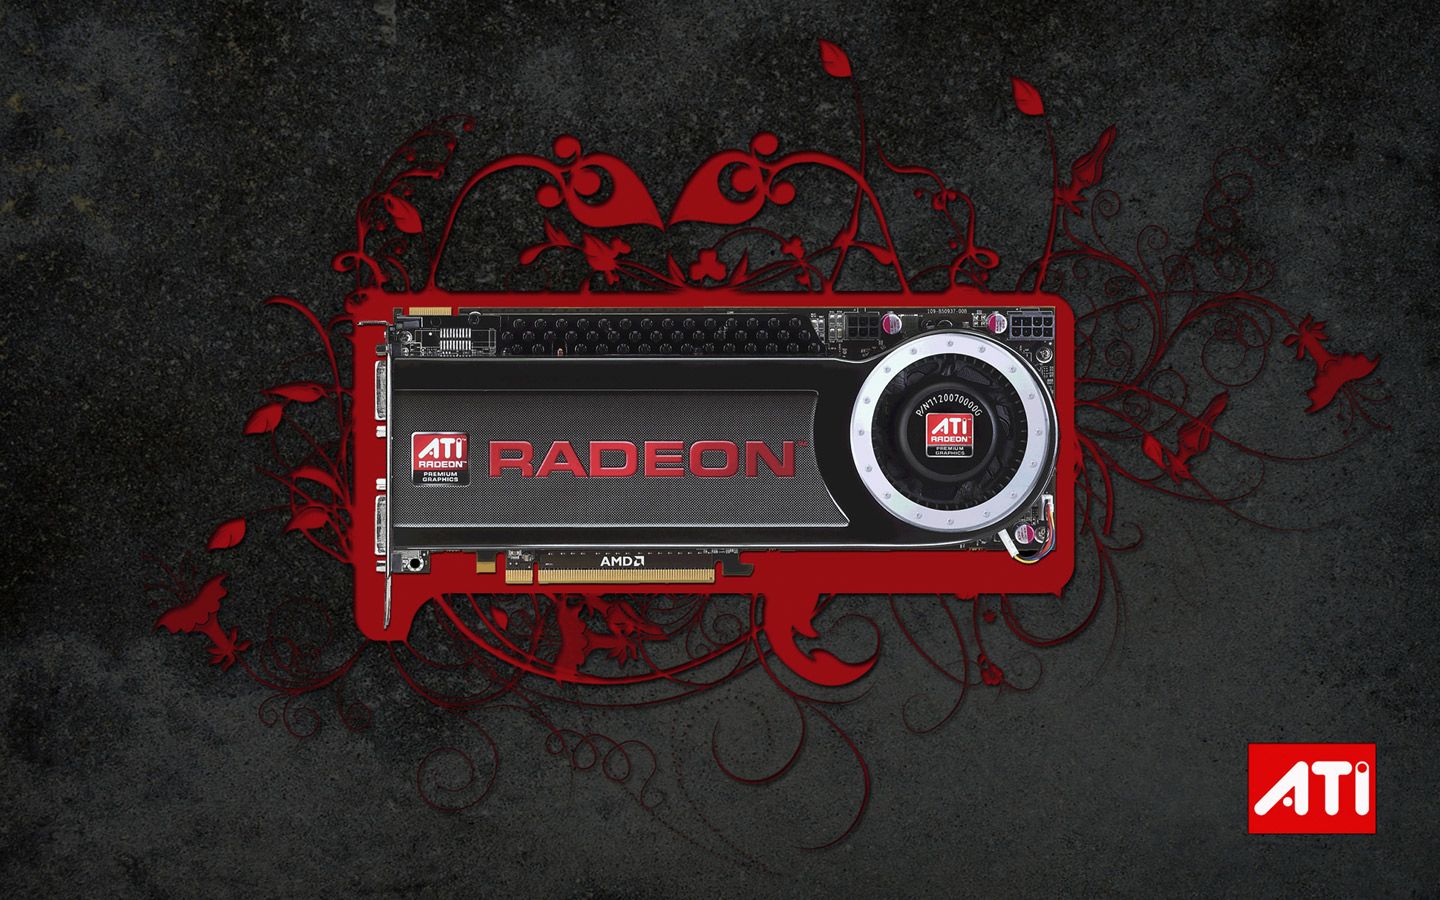 looking for some slick AMD wallpapers.